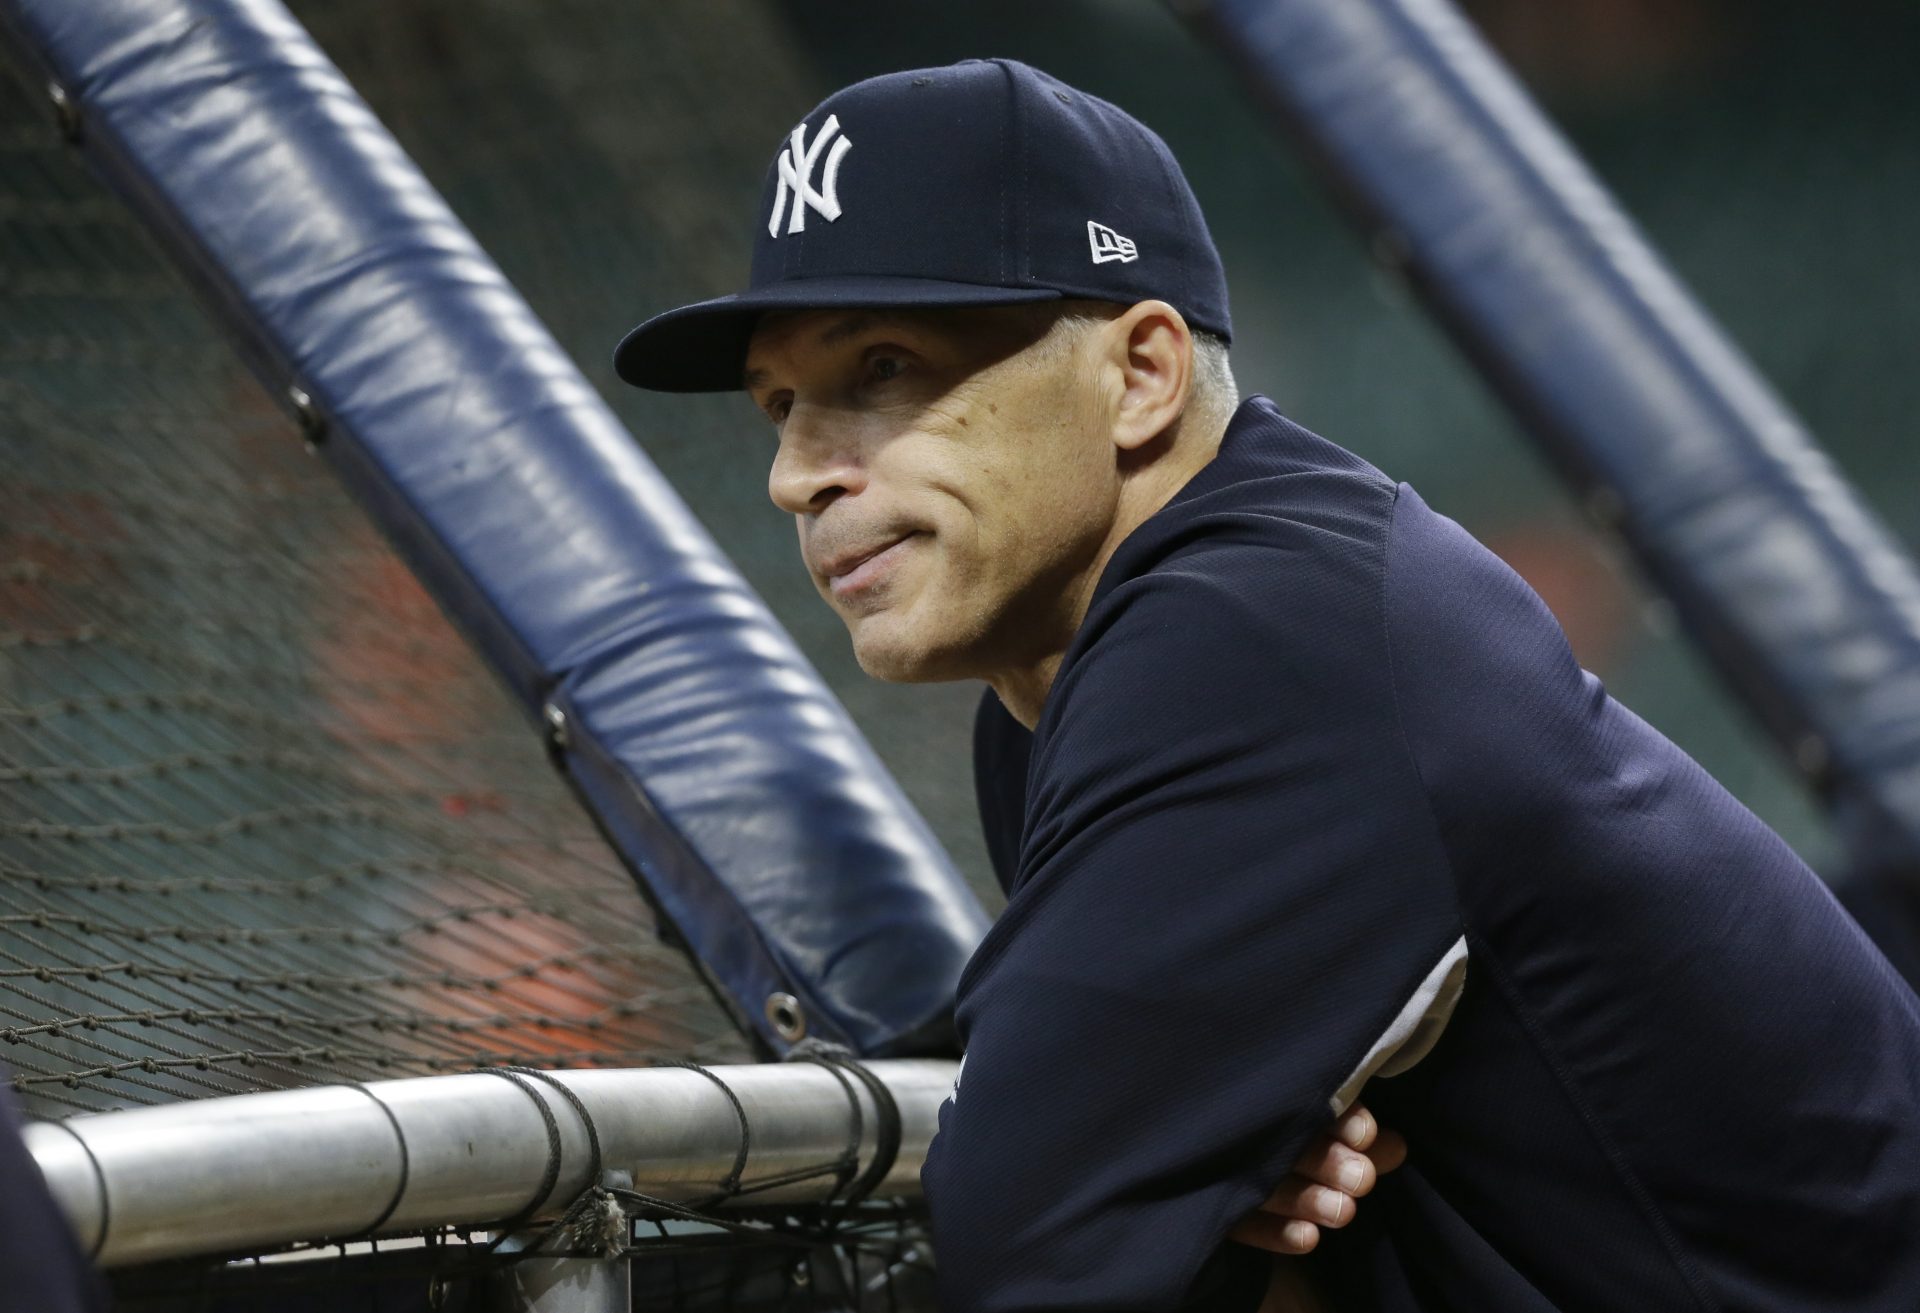 FILE PHOTO: New York Yankees manager Joe Girardi watches batting practice before Game 1 of baseball's American League Championship Series against the Houston Astros Friday, Oct. 13, 2017, in Houston.